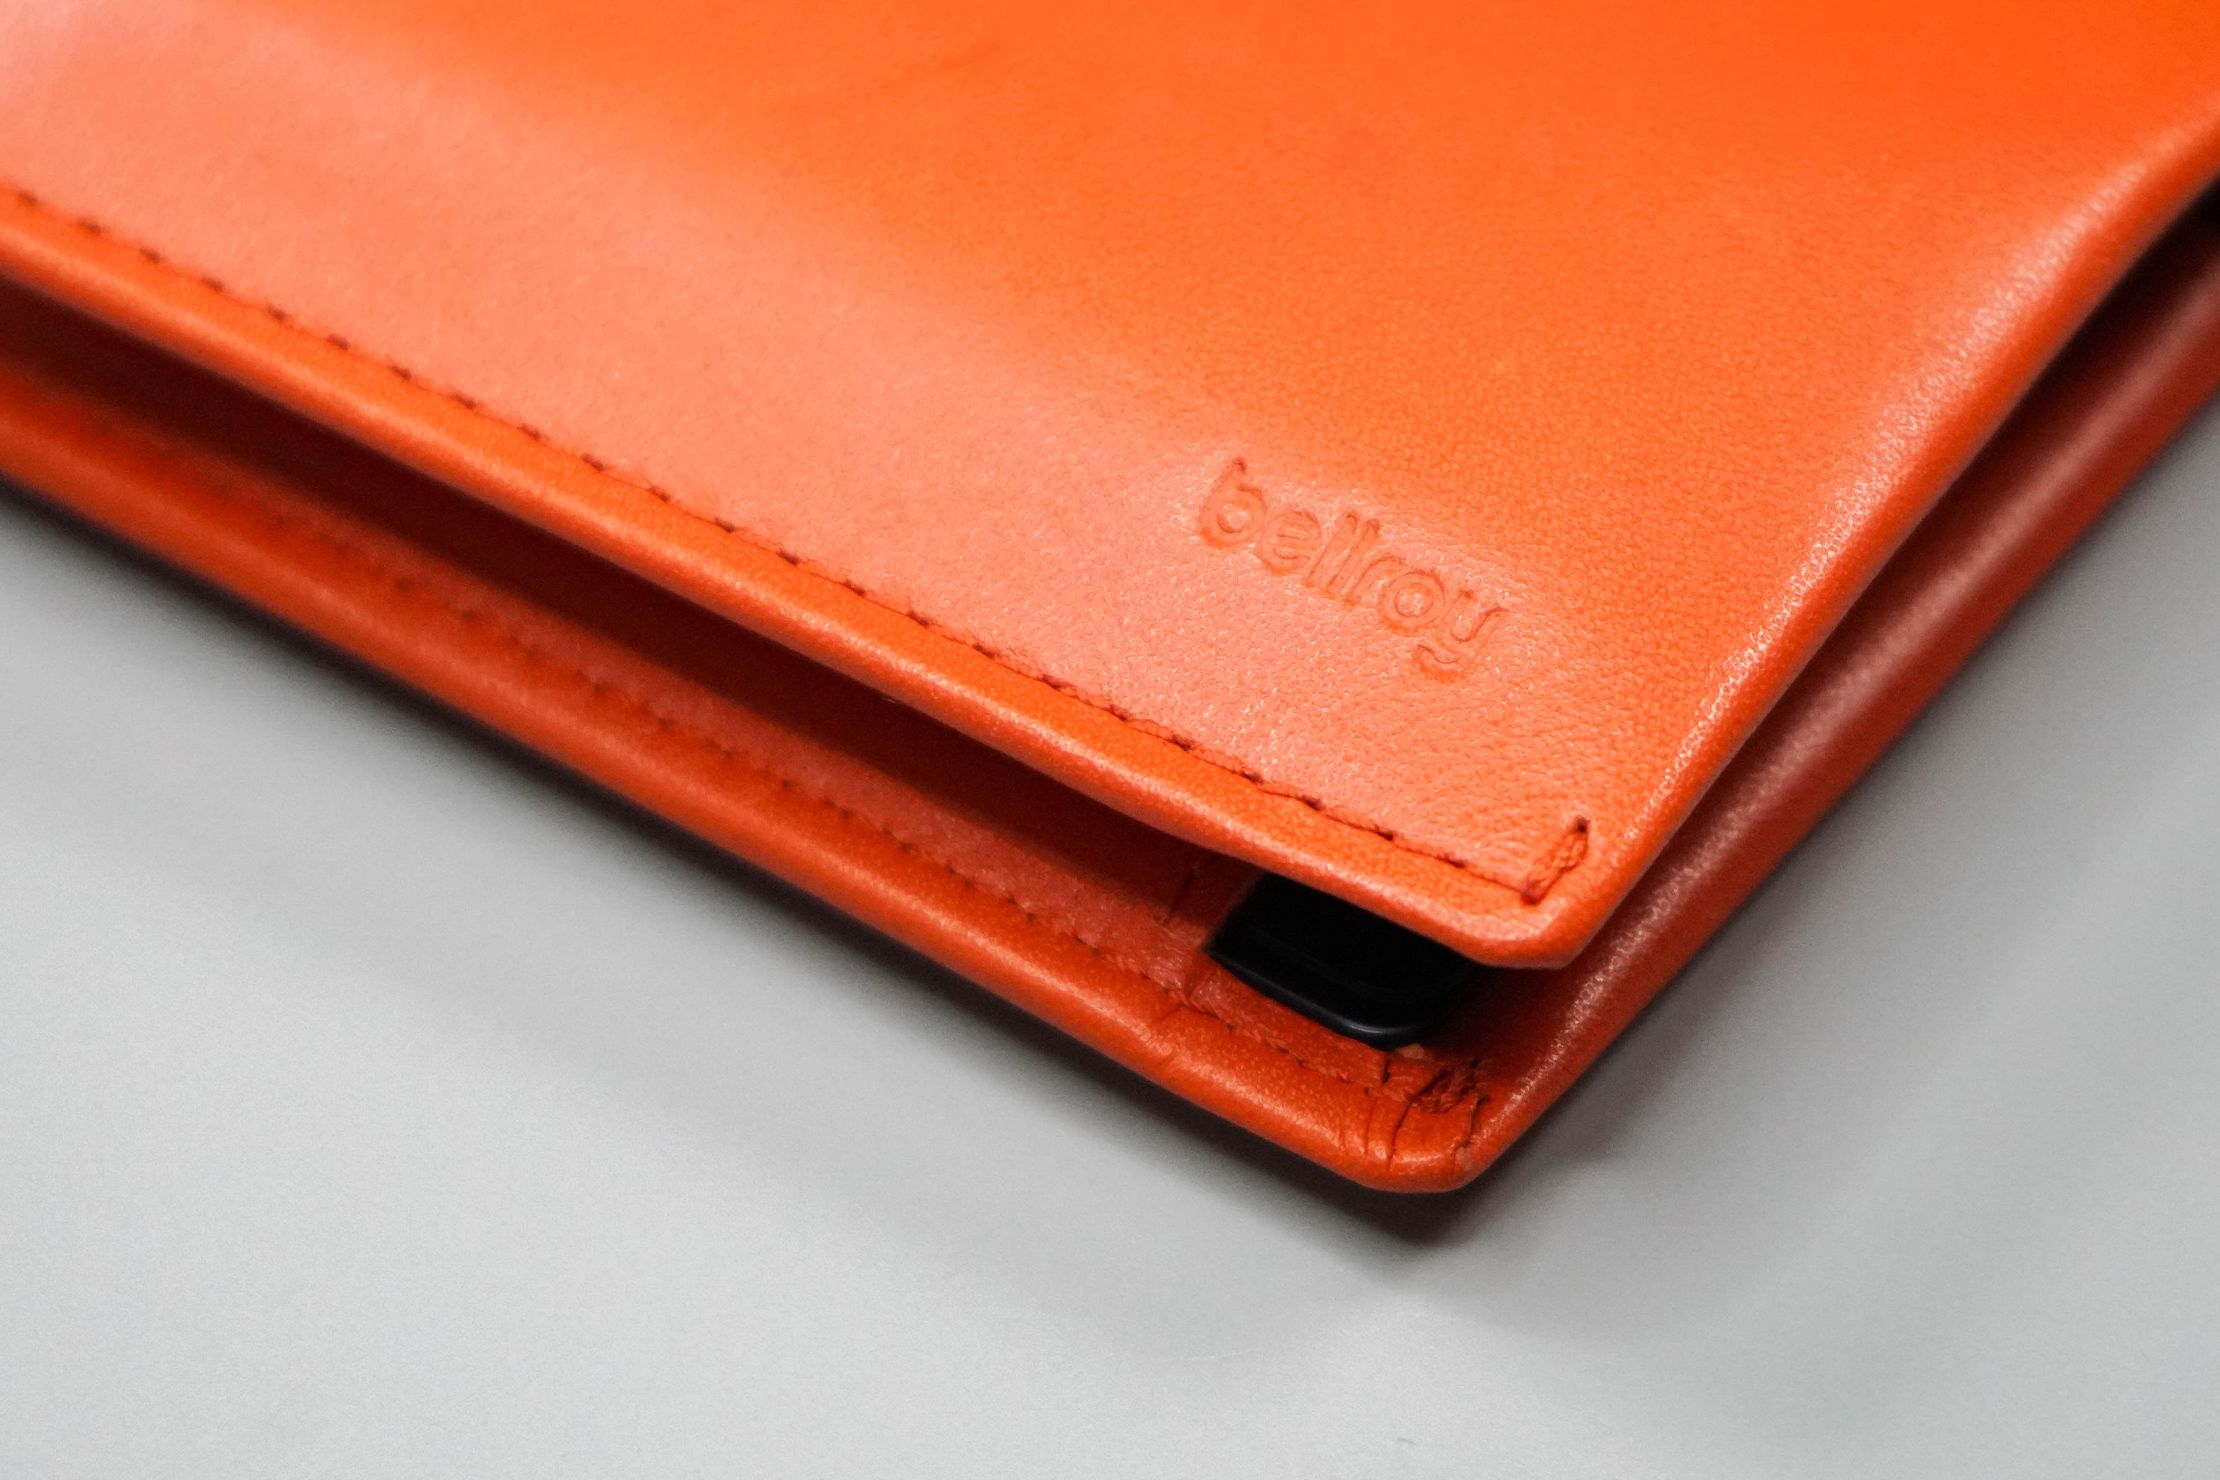 Bellroy Slim Sleeve Material and Logo